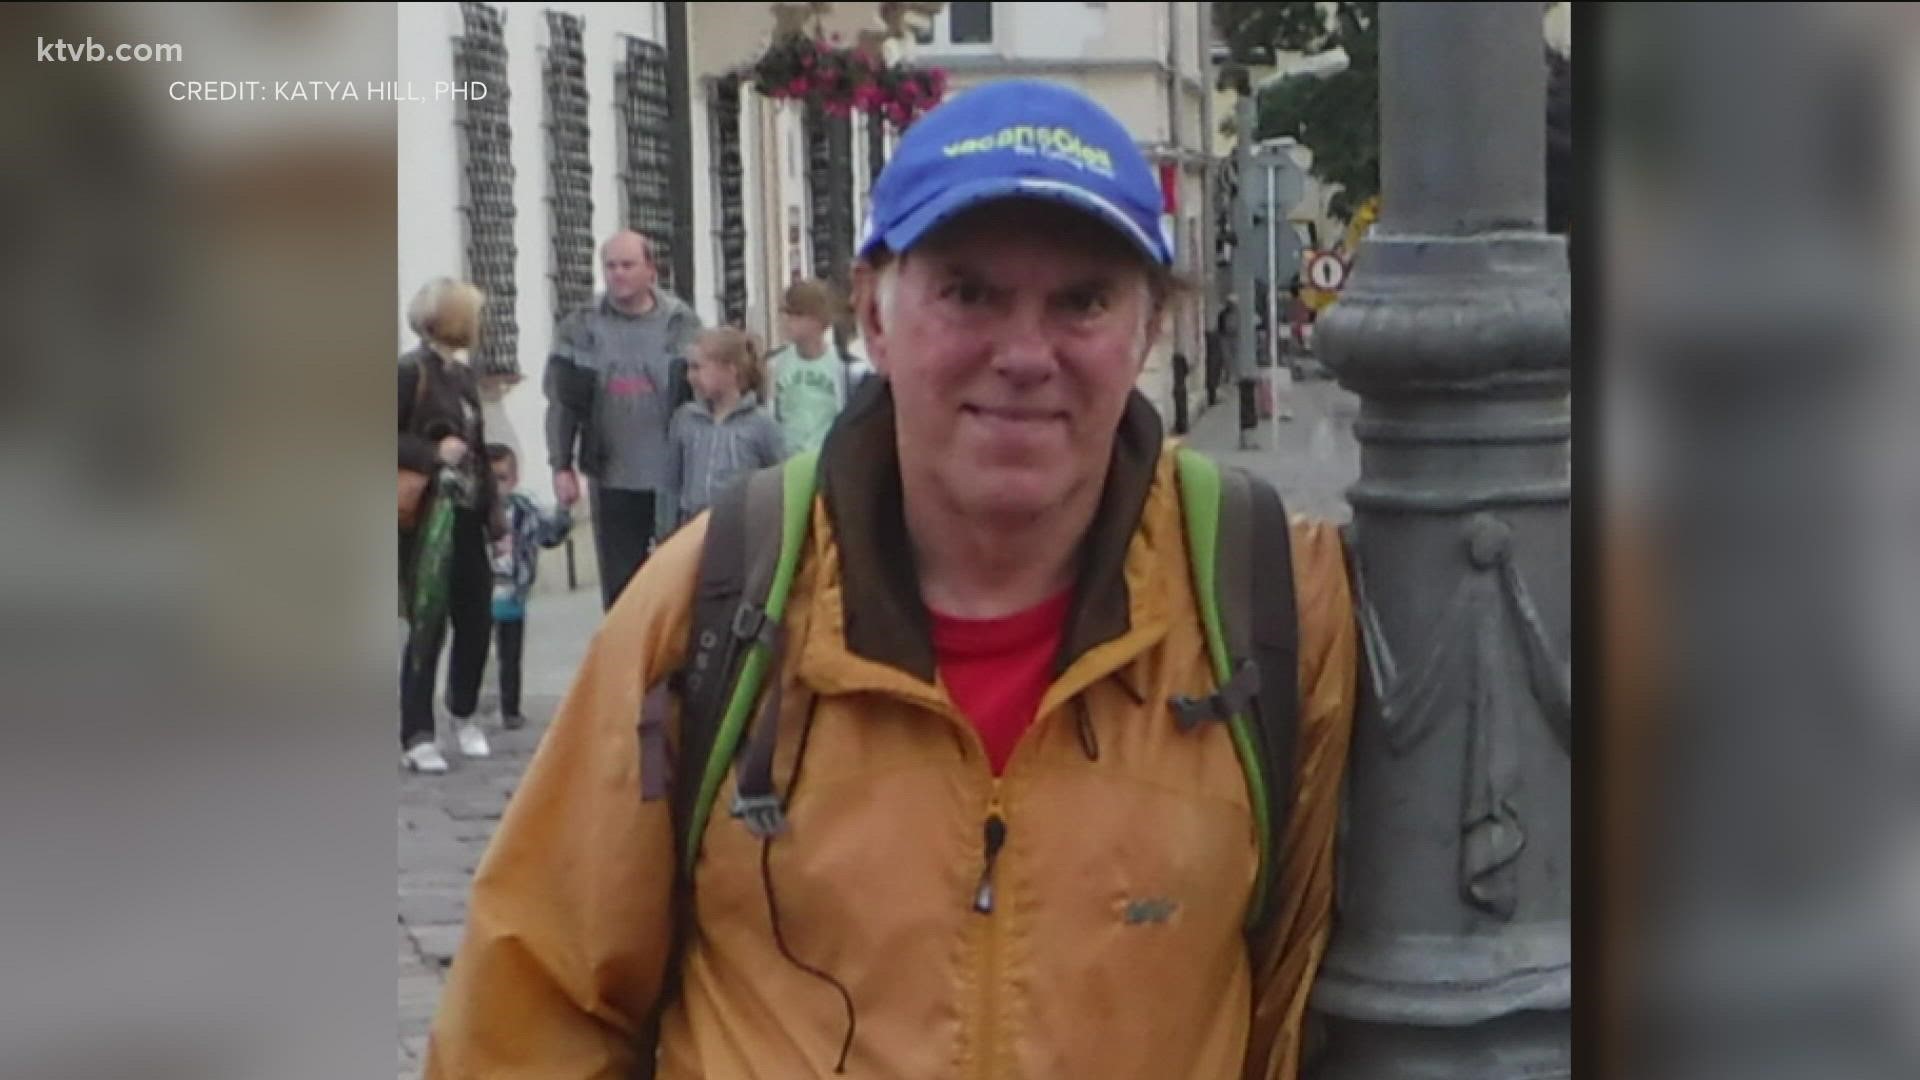 Jimmy Hill, from Driggs, had been living and teaching in Ukraine. His family says he and several others were killed while waiting in a bread line.